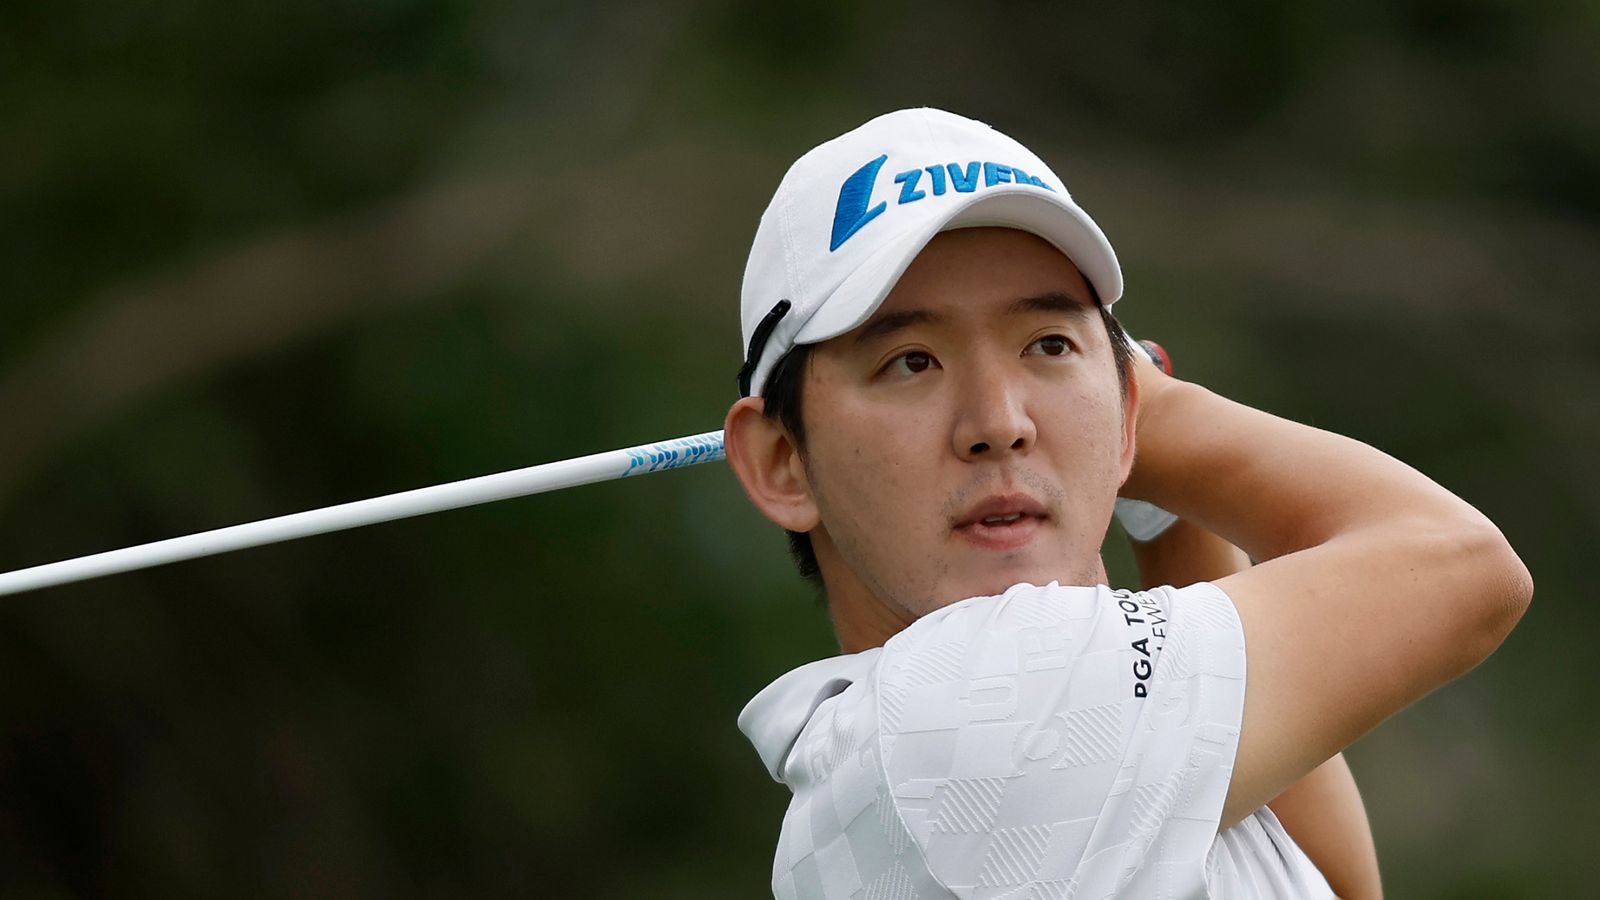 AT&T Byron Nelson: Seung-Yul Noh is one shot away from course record with first round of 60 in Dallas

